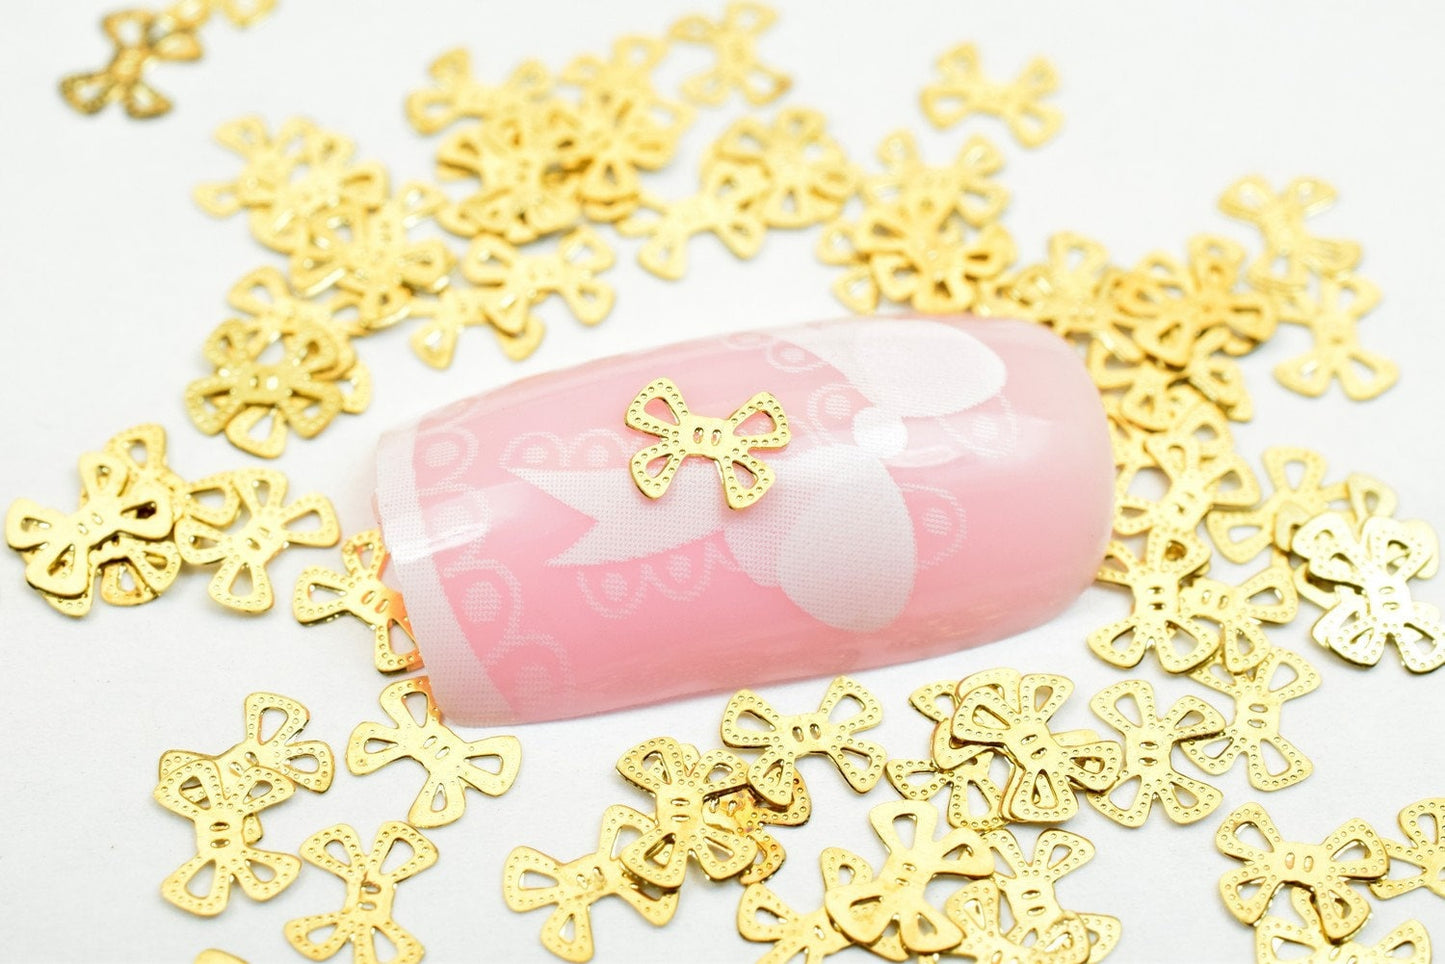 50 PCs Bow Inspired Nail Art Different Designs Star Butterfly I Love You Dragonfly Heart Happy Face Decals Gold Metal 3D Decoration DIY Art